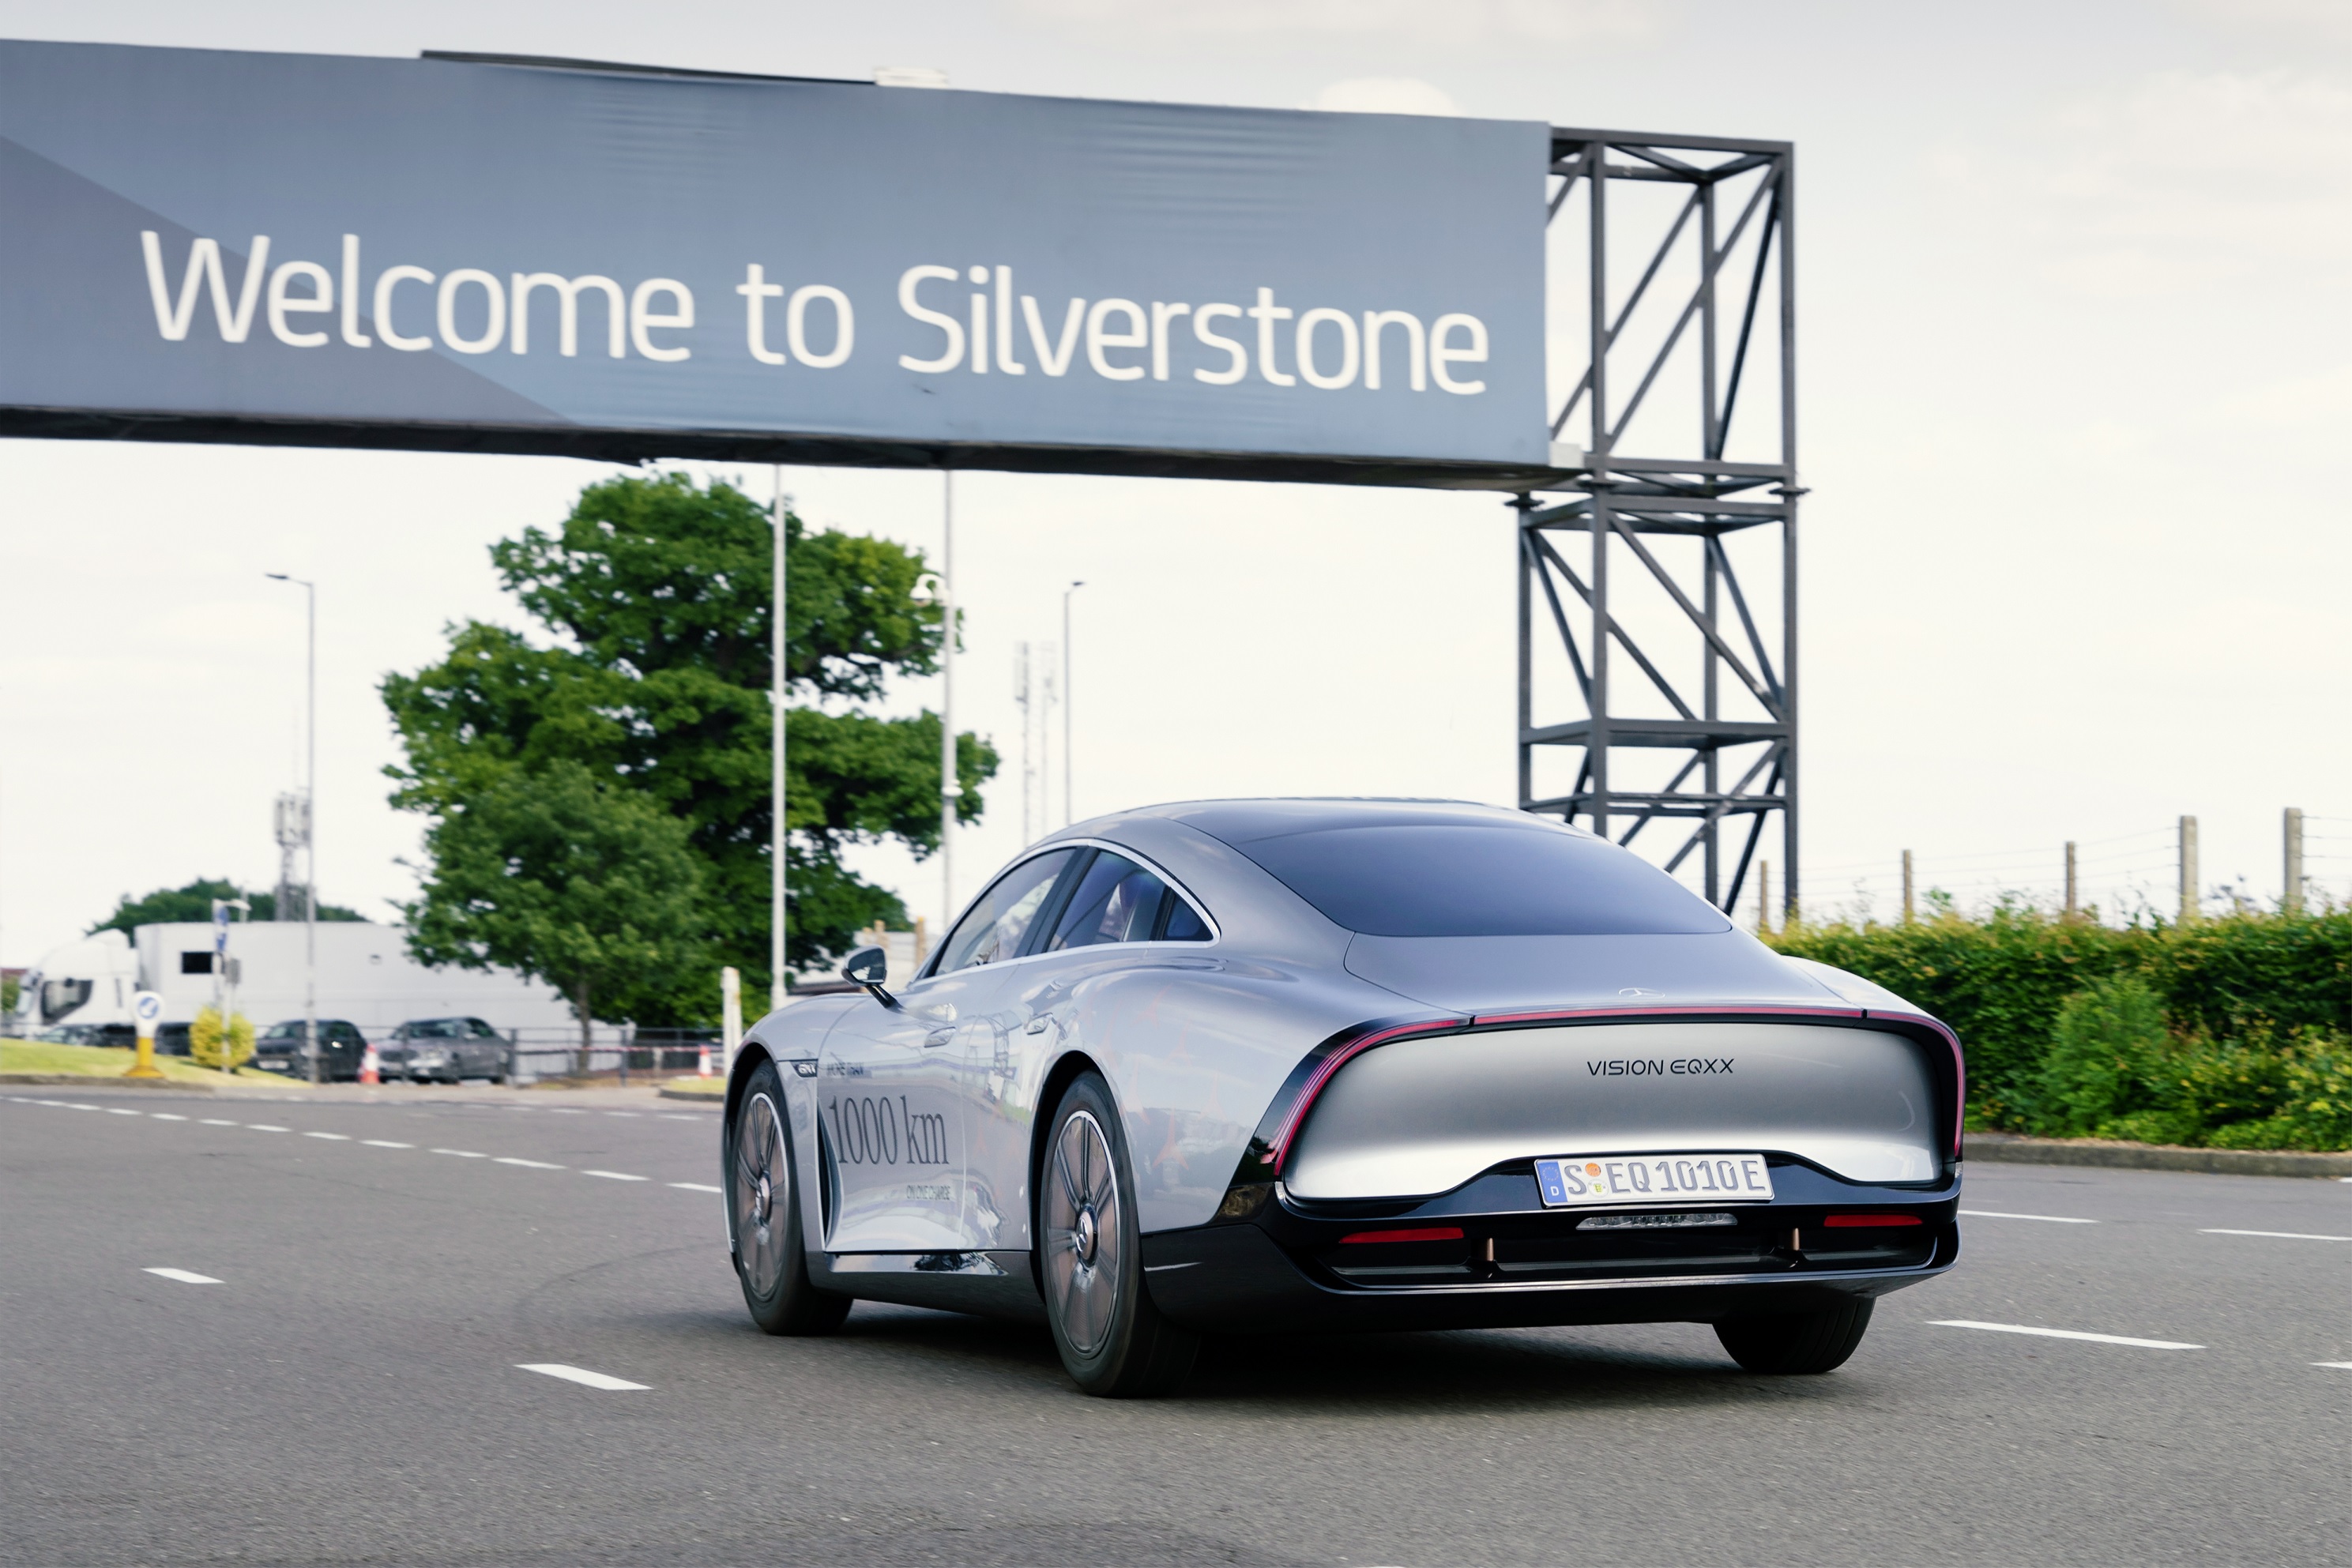 The silver Mercedes-Benz Vision EQXX Concept arriving at the Silverstone racetrack